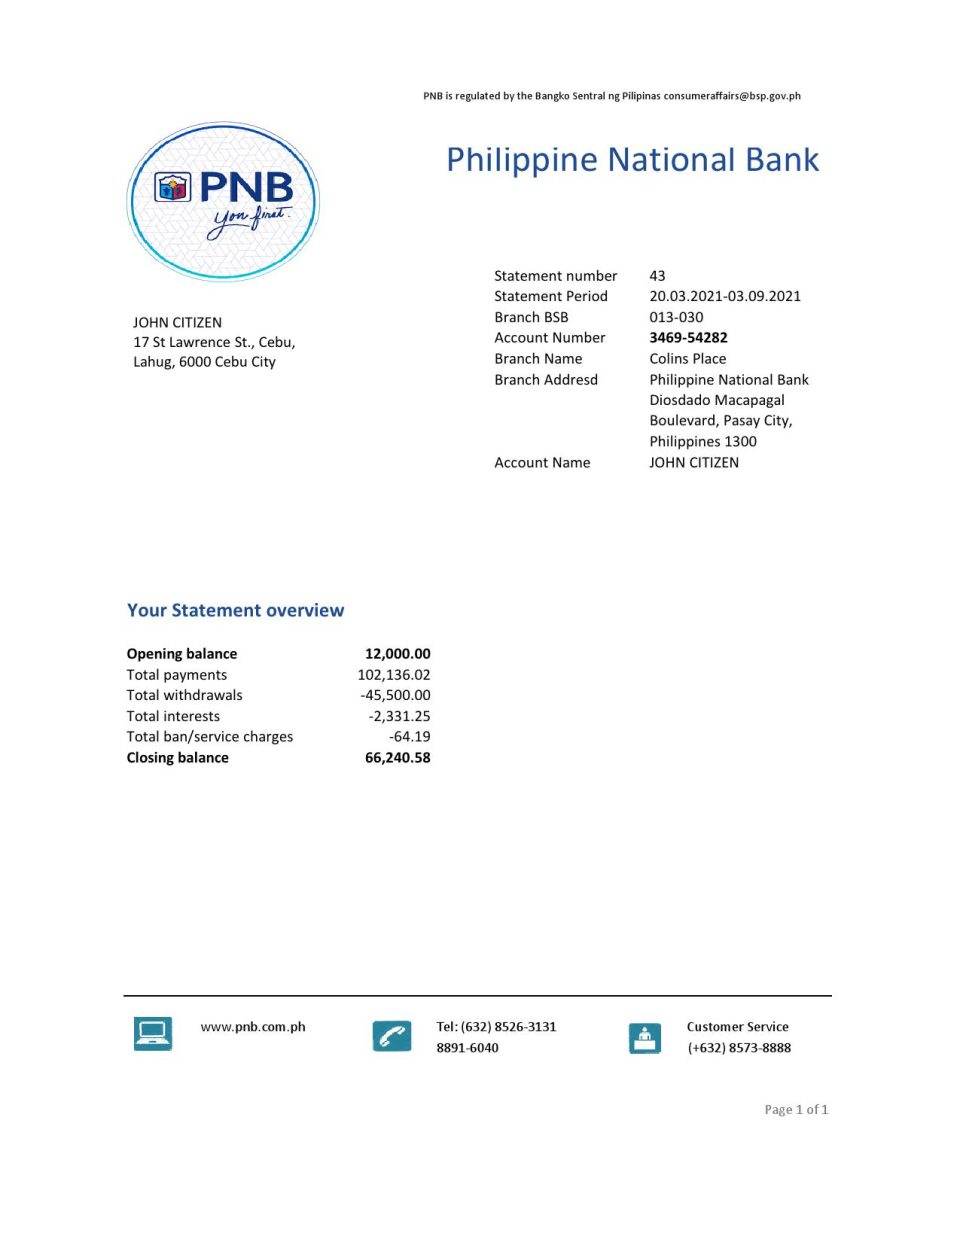 Philippines National Bank (PNB) proof of address bank statement template in Excel and PDF format